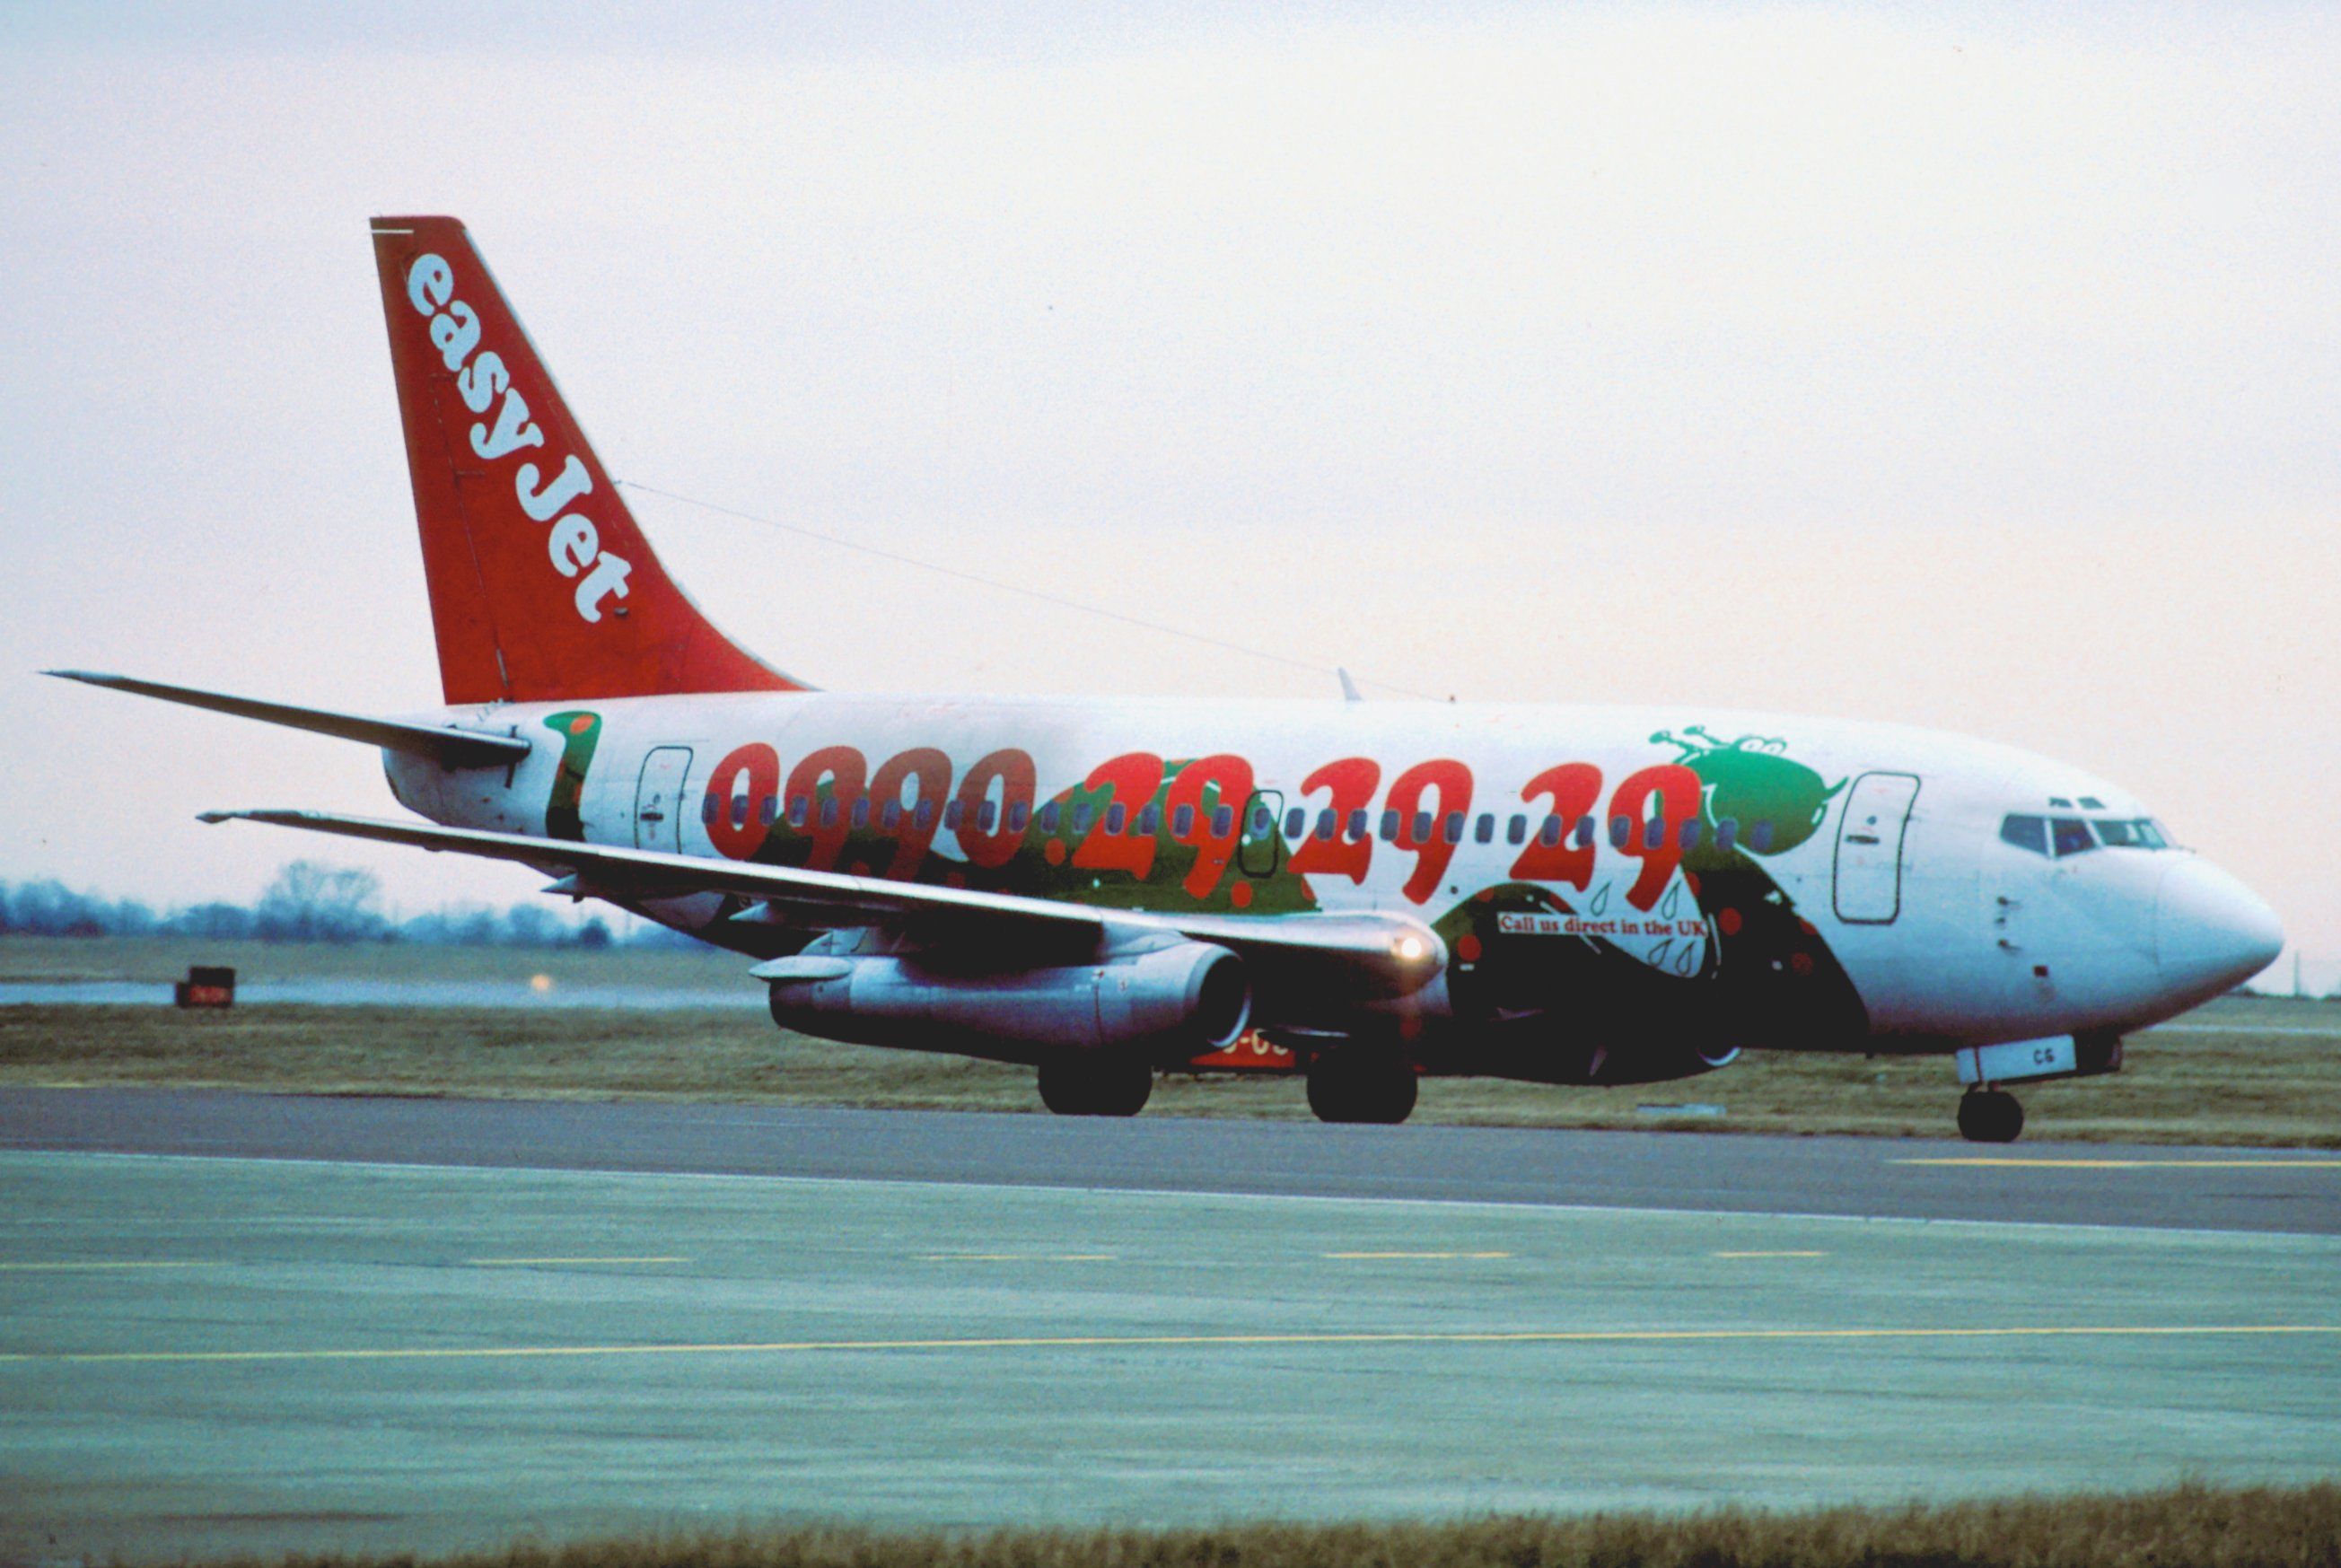 An old easyJet aircraft taxiing to the runway.